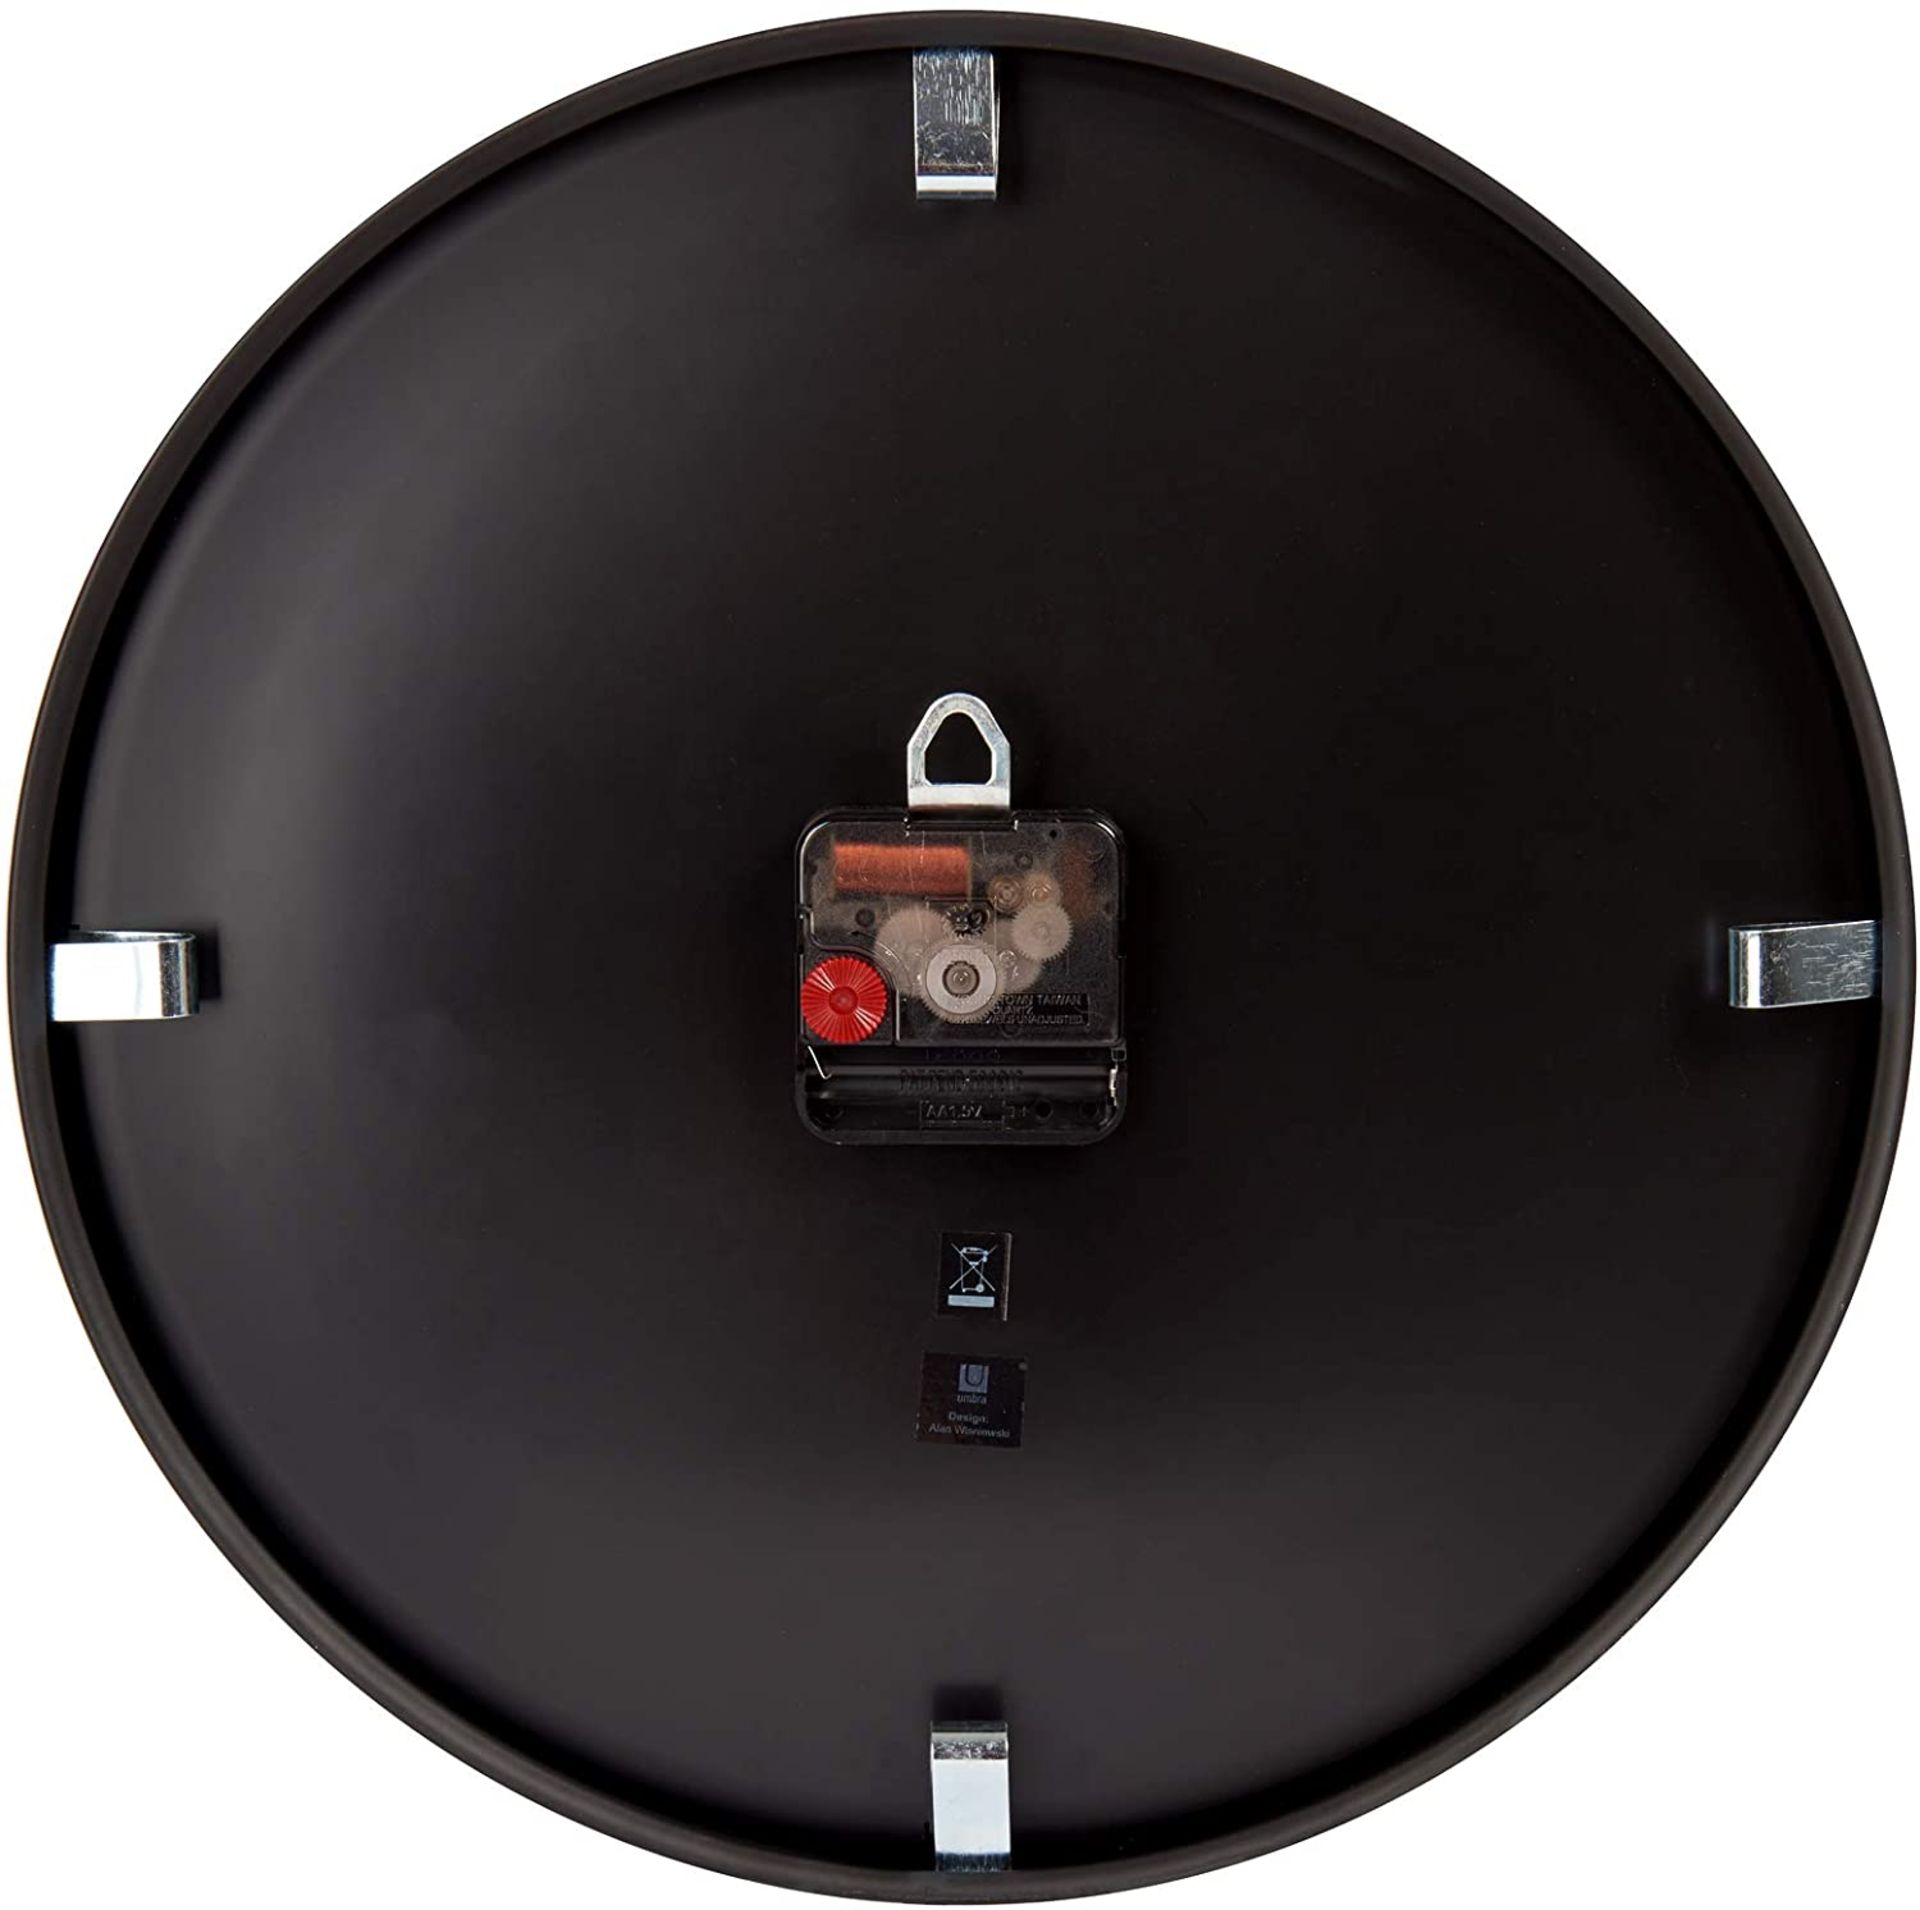 1 x 'Madera' Designer Wall Clock Featuring A Black Frame And Walnut Face - 32cm Diameter - Brand New - Image 2 of 5